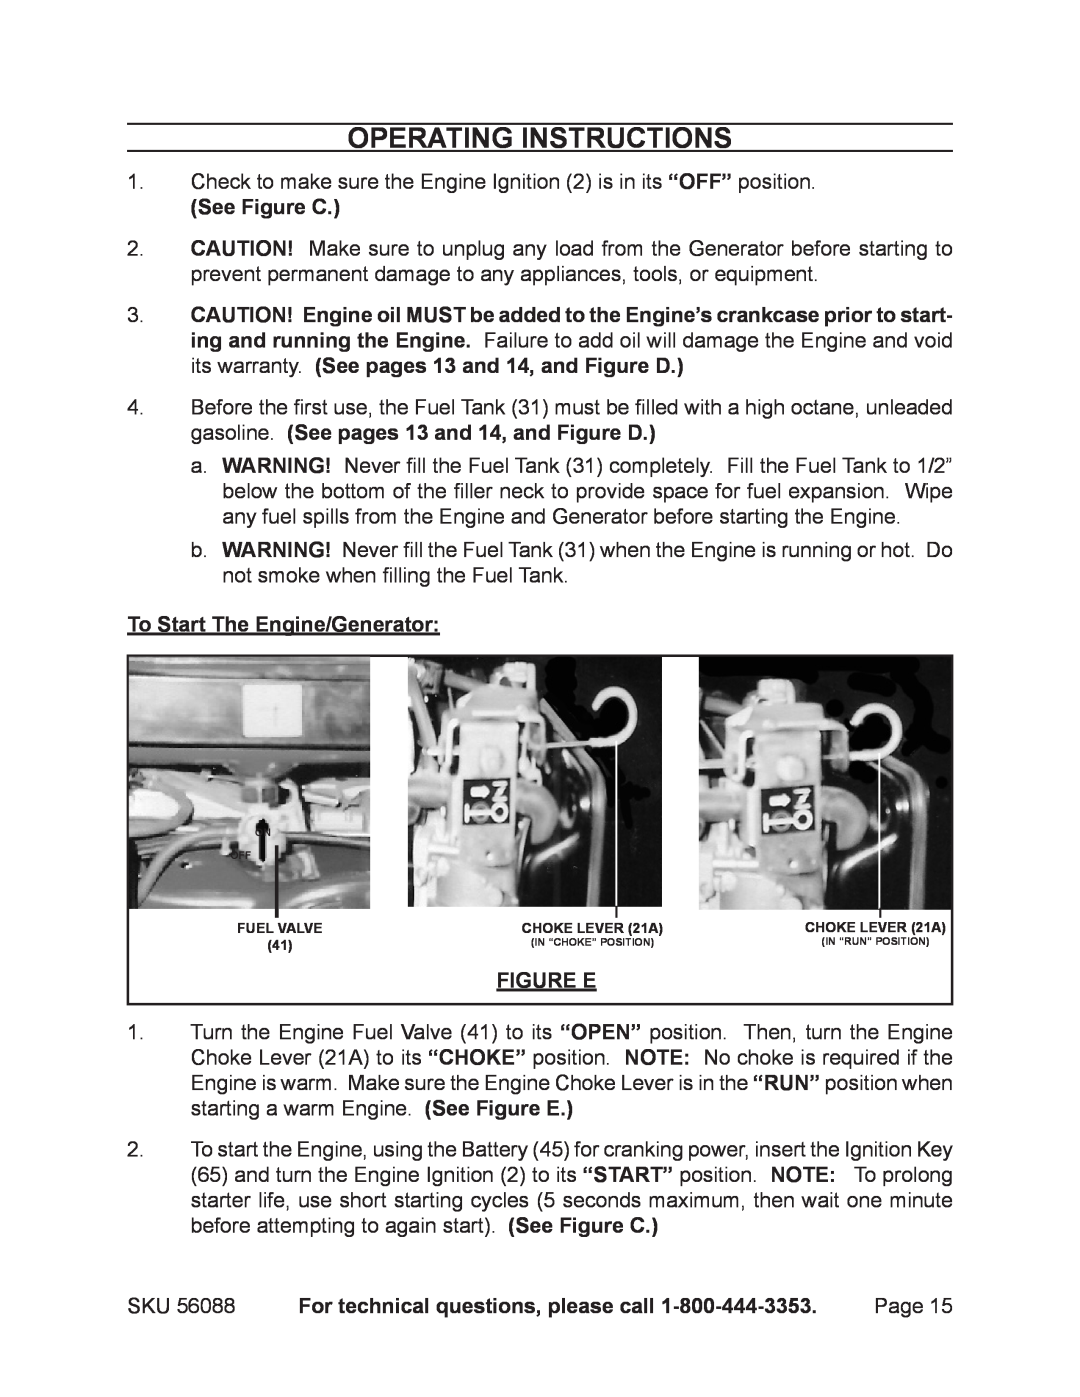 Harbor Freight Tools 56088 warranty Operating Instructions, To Start The Engine/Generator, Figure E, See Figure C 